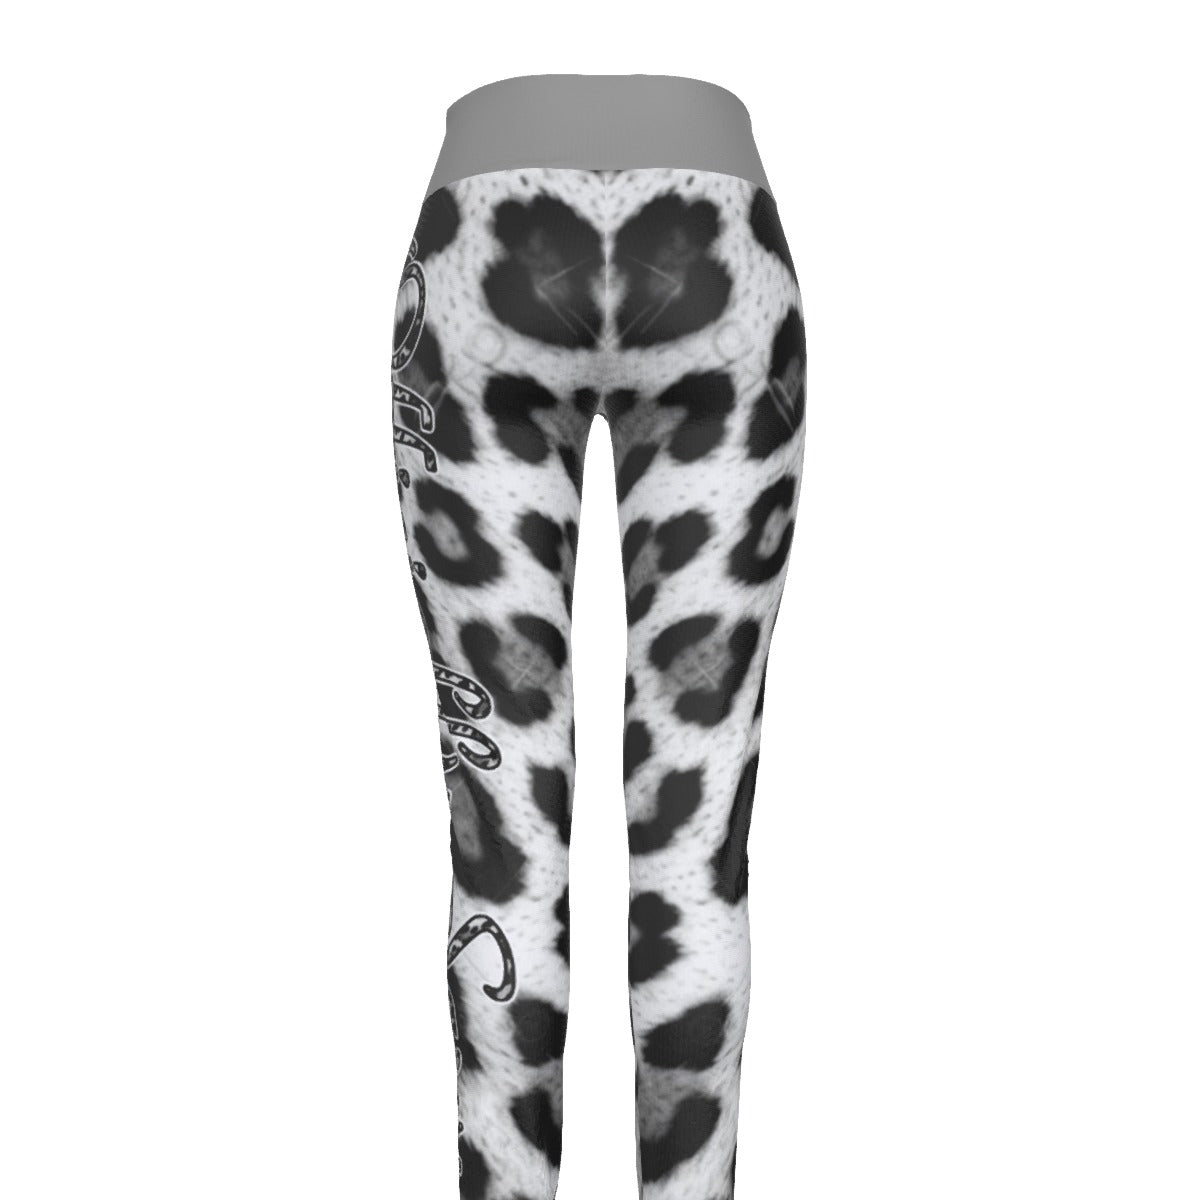 Officially Sexy Snow Leopard Print Collection Women's Grey High Waist Leggings #2 (English) 3